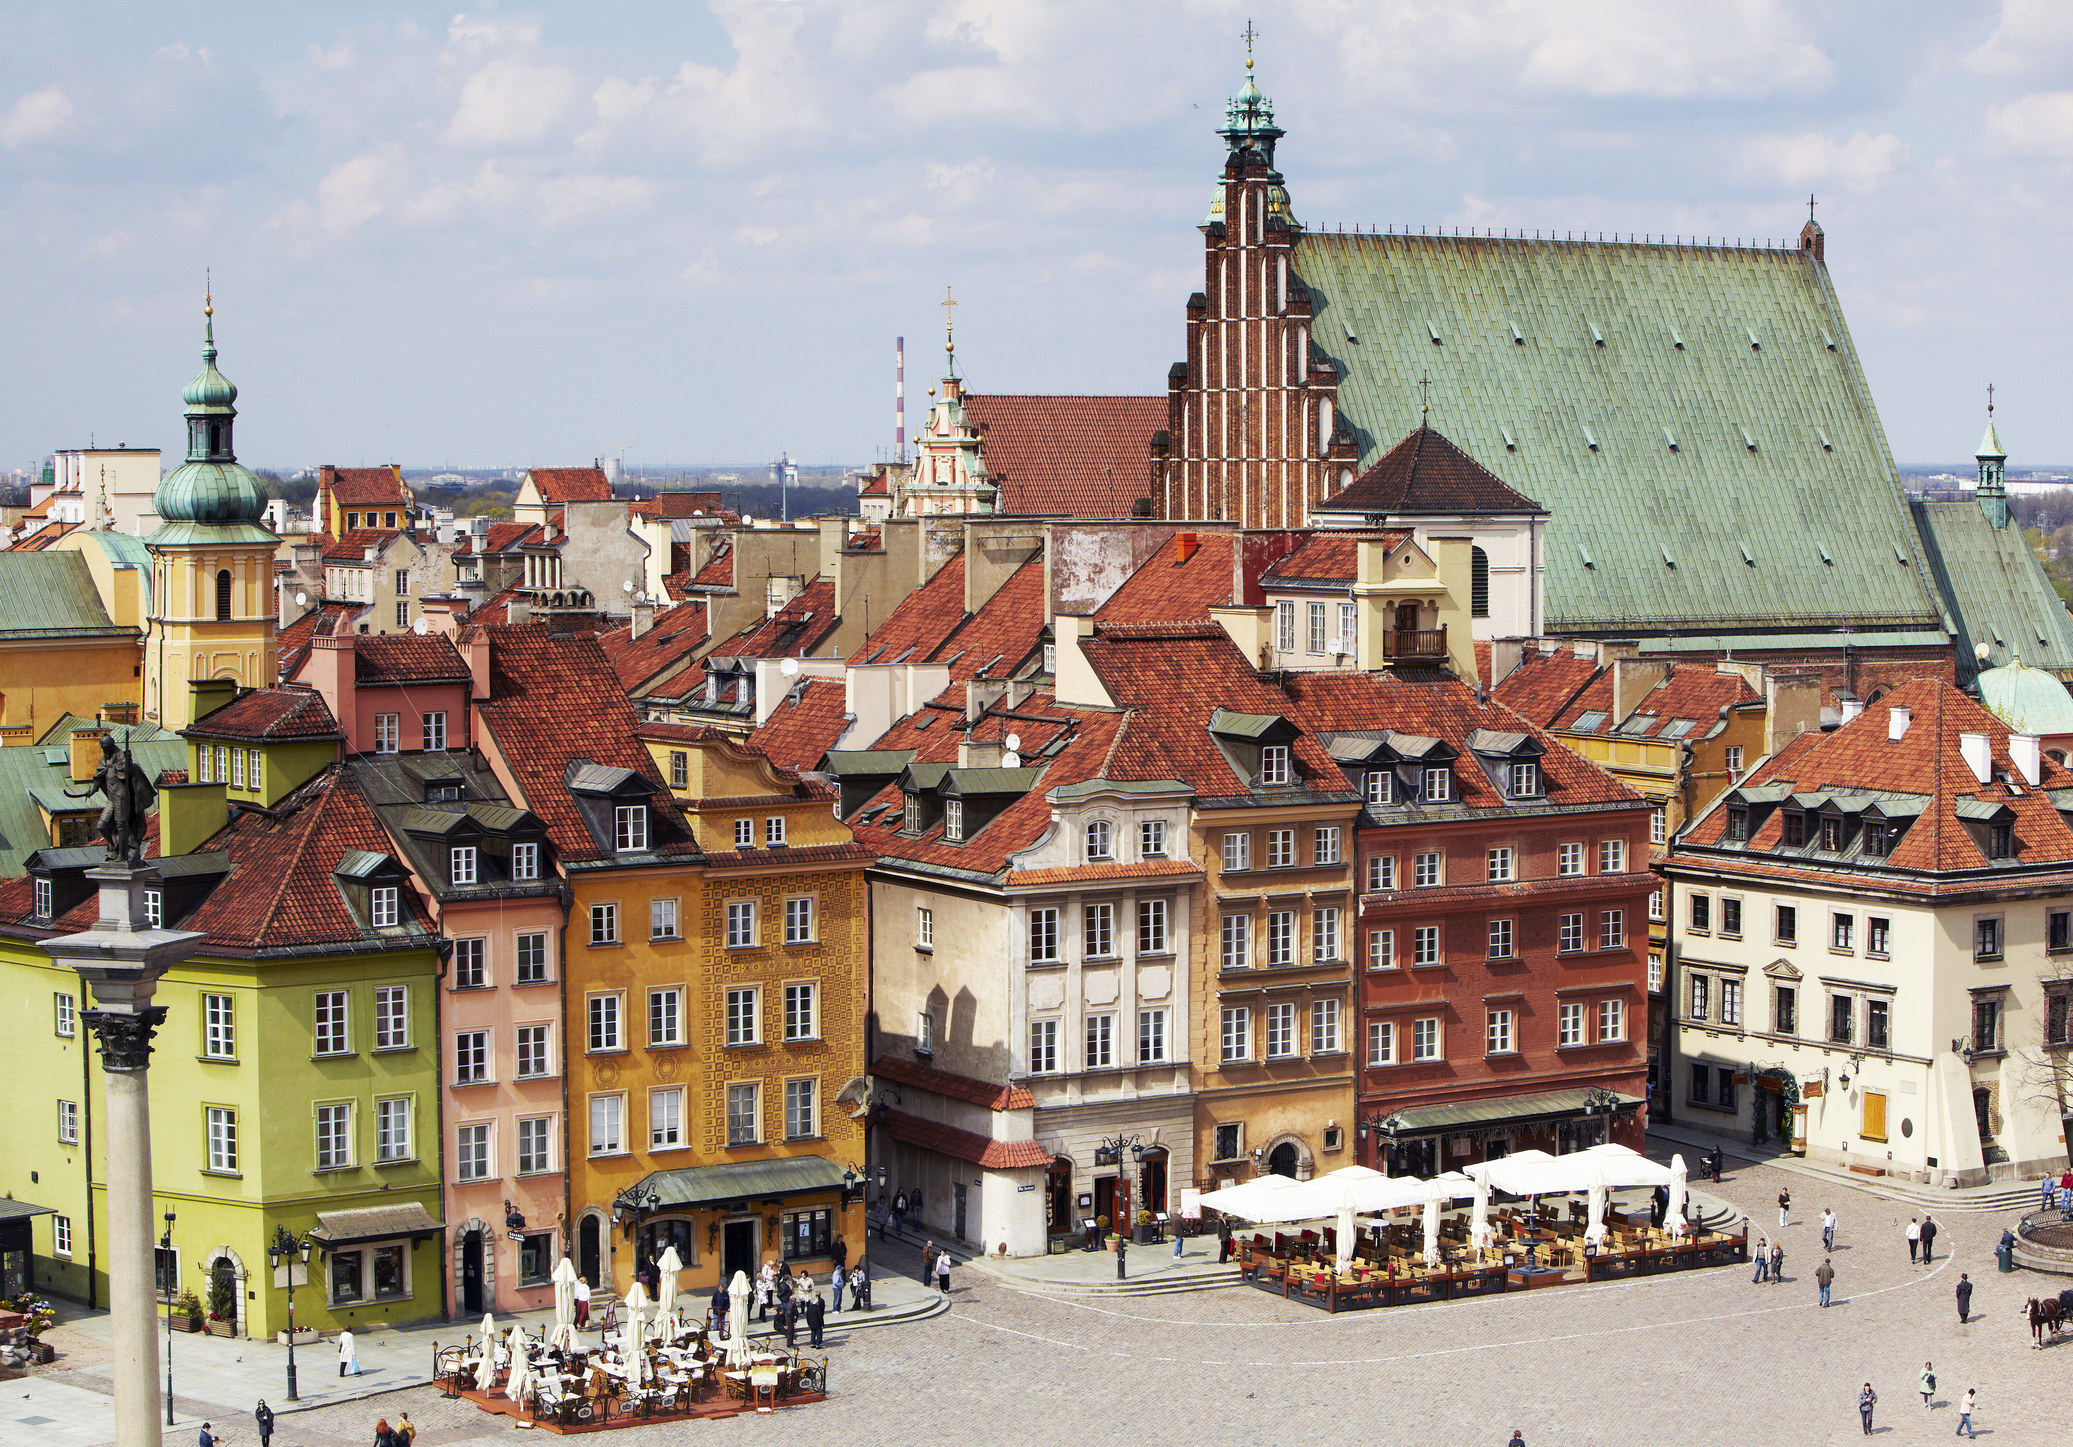 The old city of Warsaw.